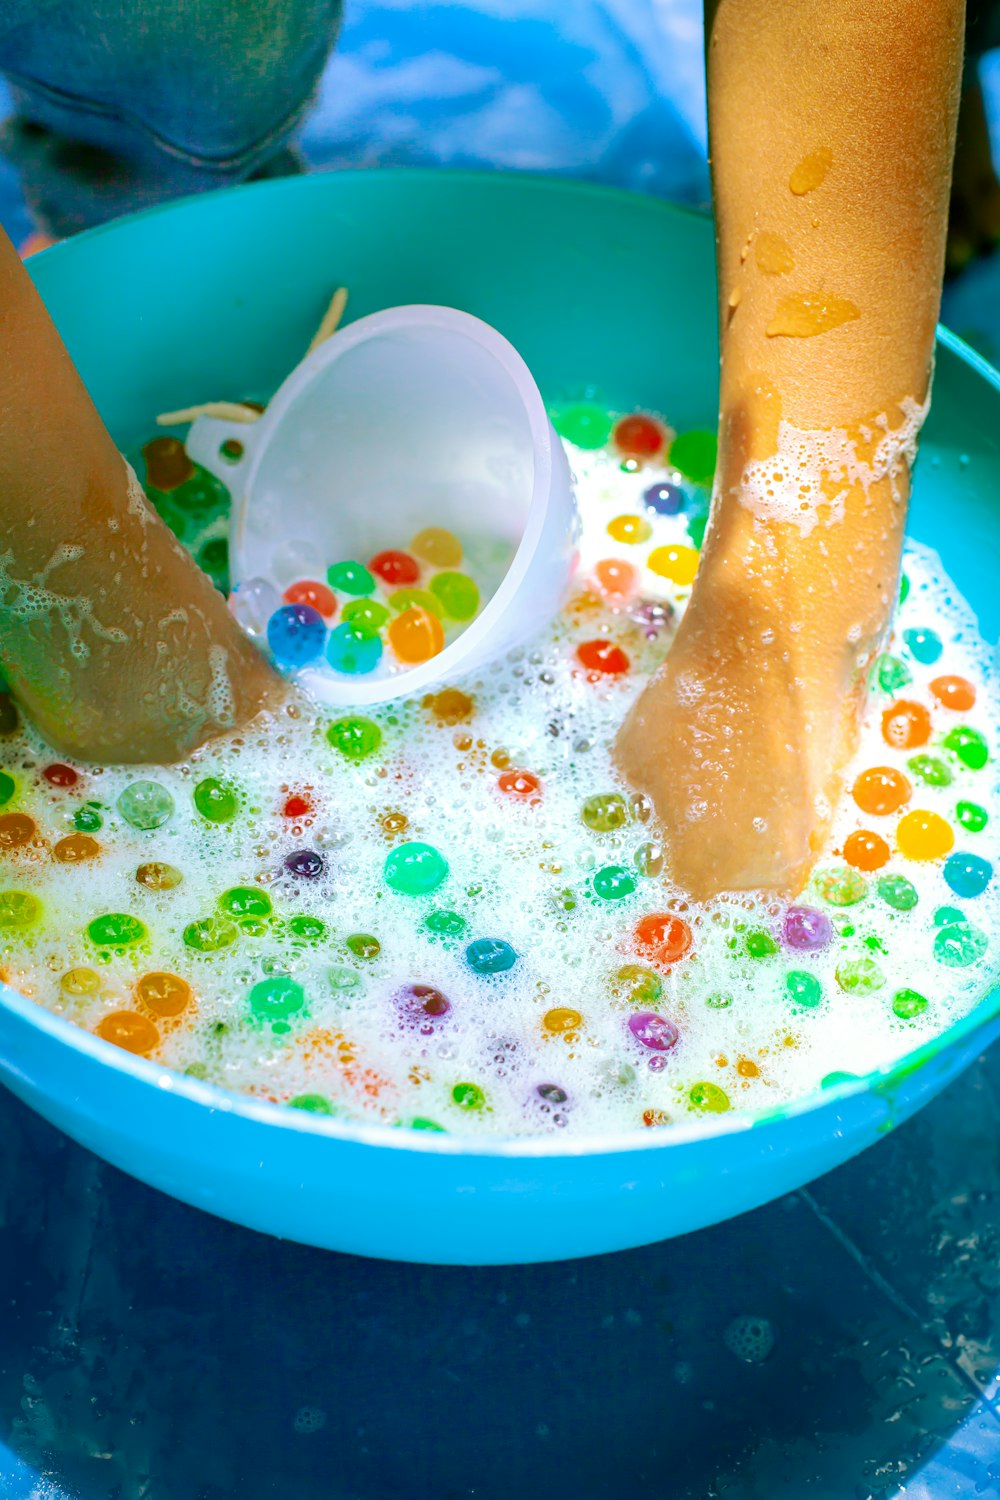 a child's feet in a bowl of water with gummy bears